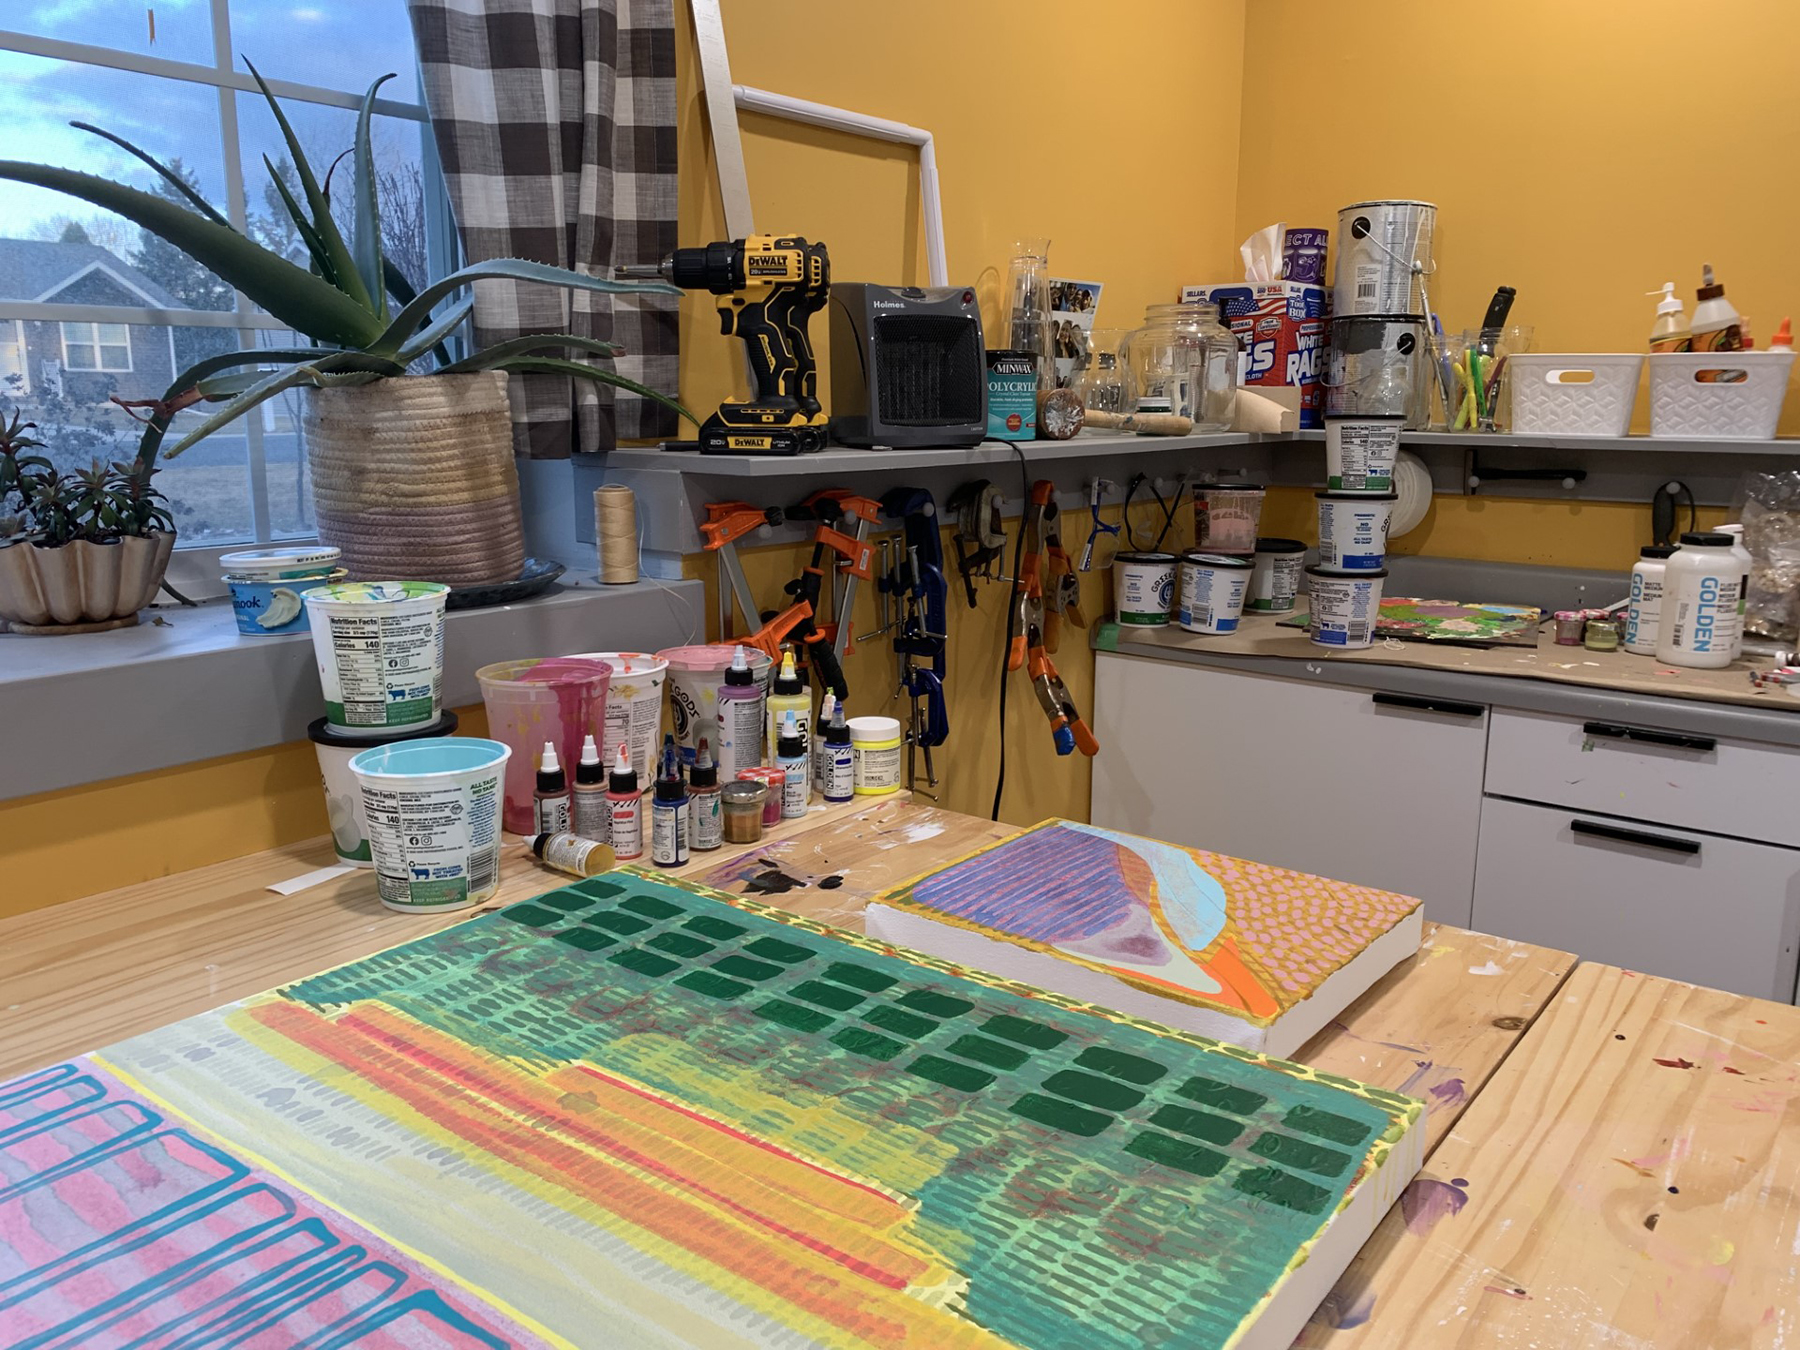 Photograph of an artist studio, paintings in the forground with paints and supplies behind.